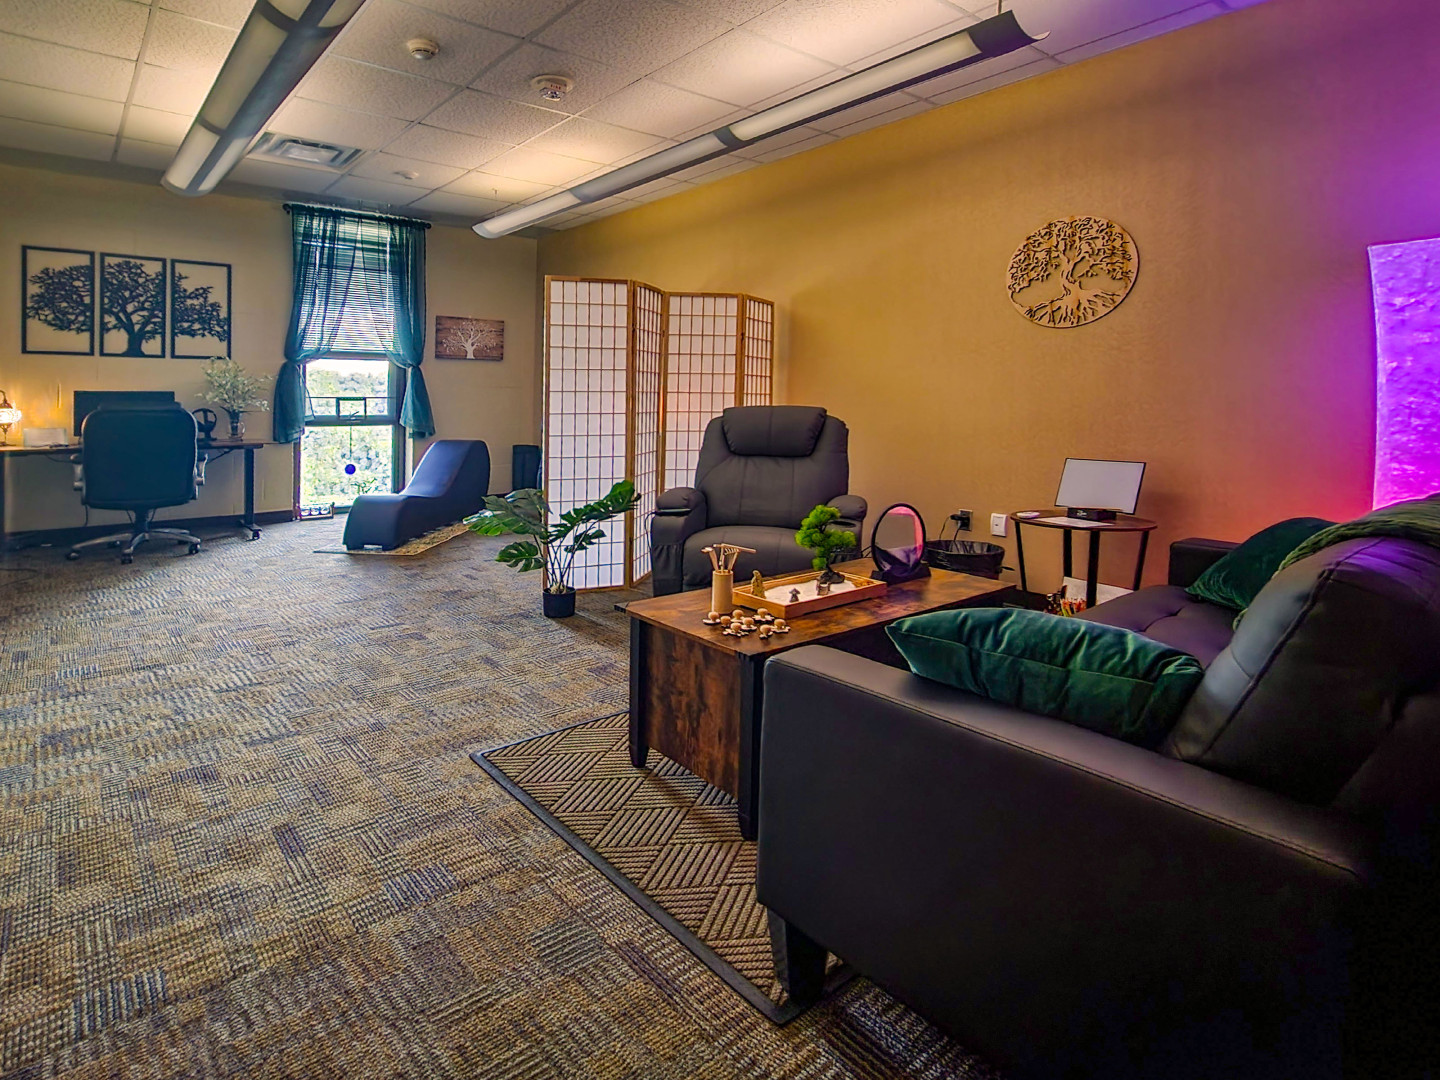 View of the Mind Spa includes biofeedback station, yoga station, and two relaxation stations.